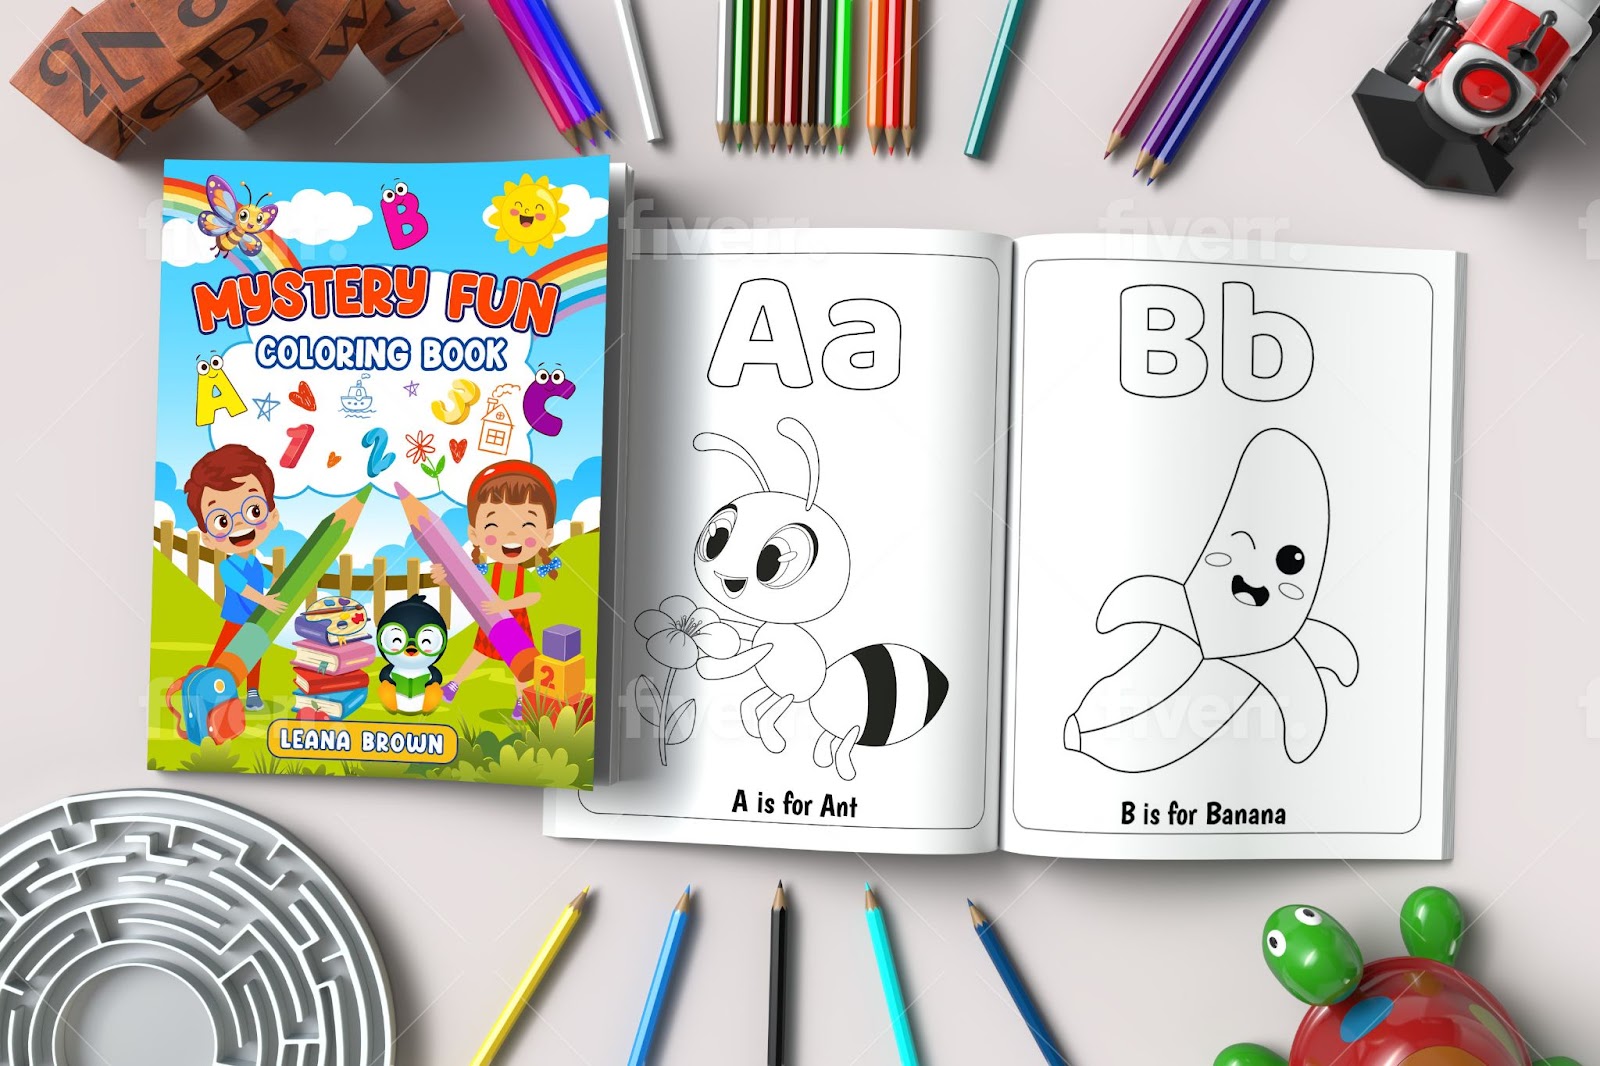 Mystery Fun Coloring Book For Kids: An Innovative Twist on Traditional Coloring Books Now Available